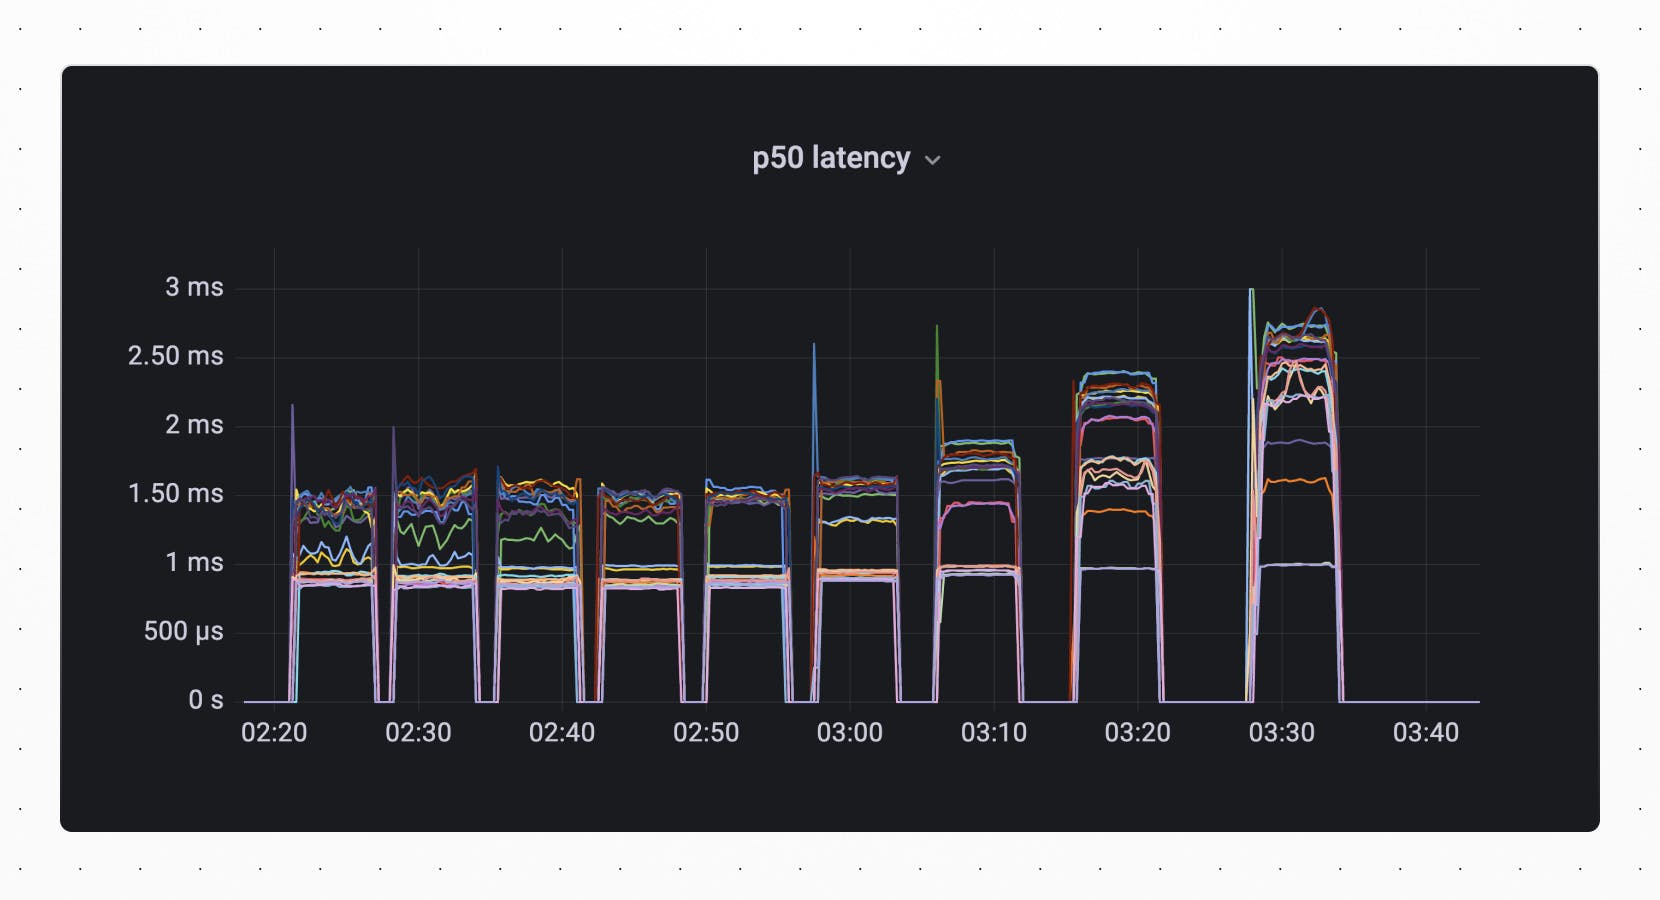 p50 latency -- chart progressively going up as time increases